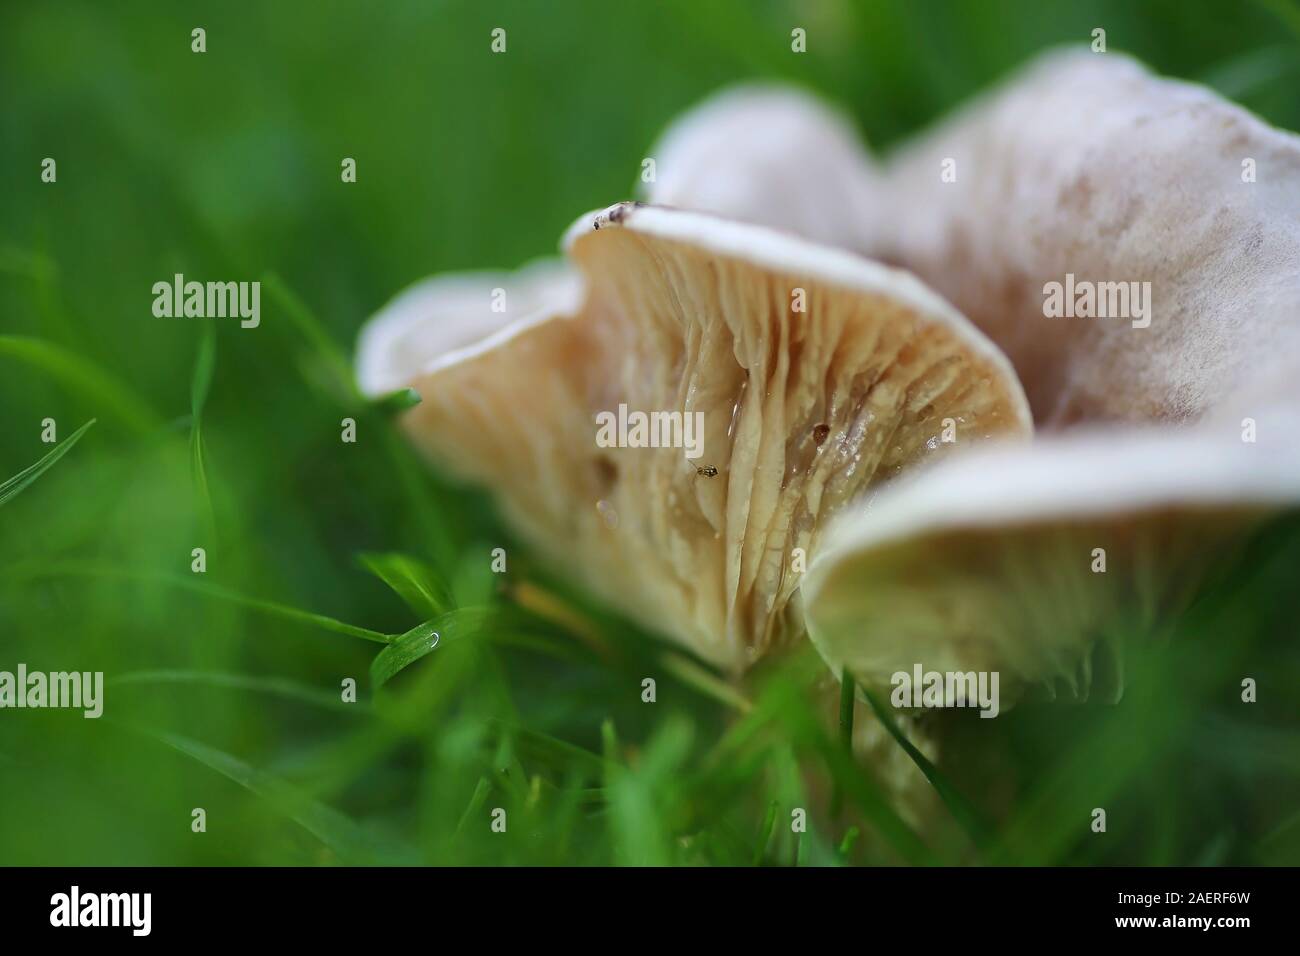 Toadstools or Fungi lamellae in the grass IV Stock Photo